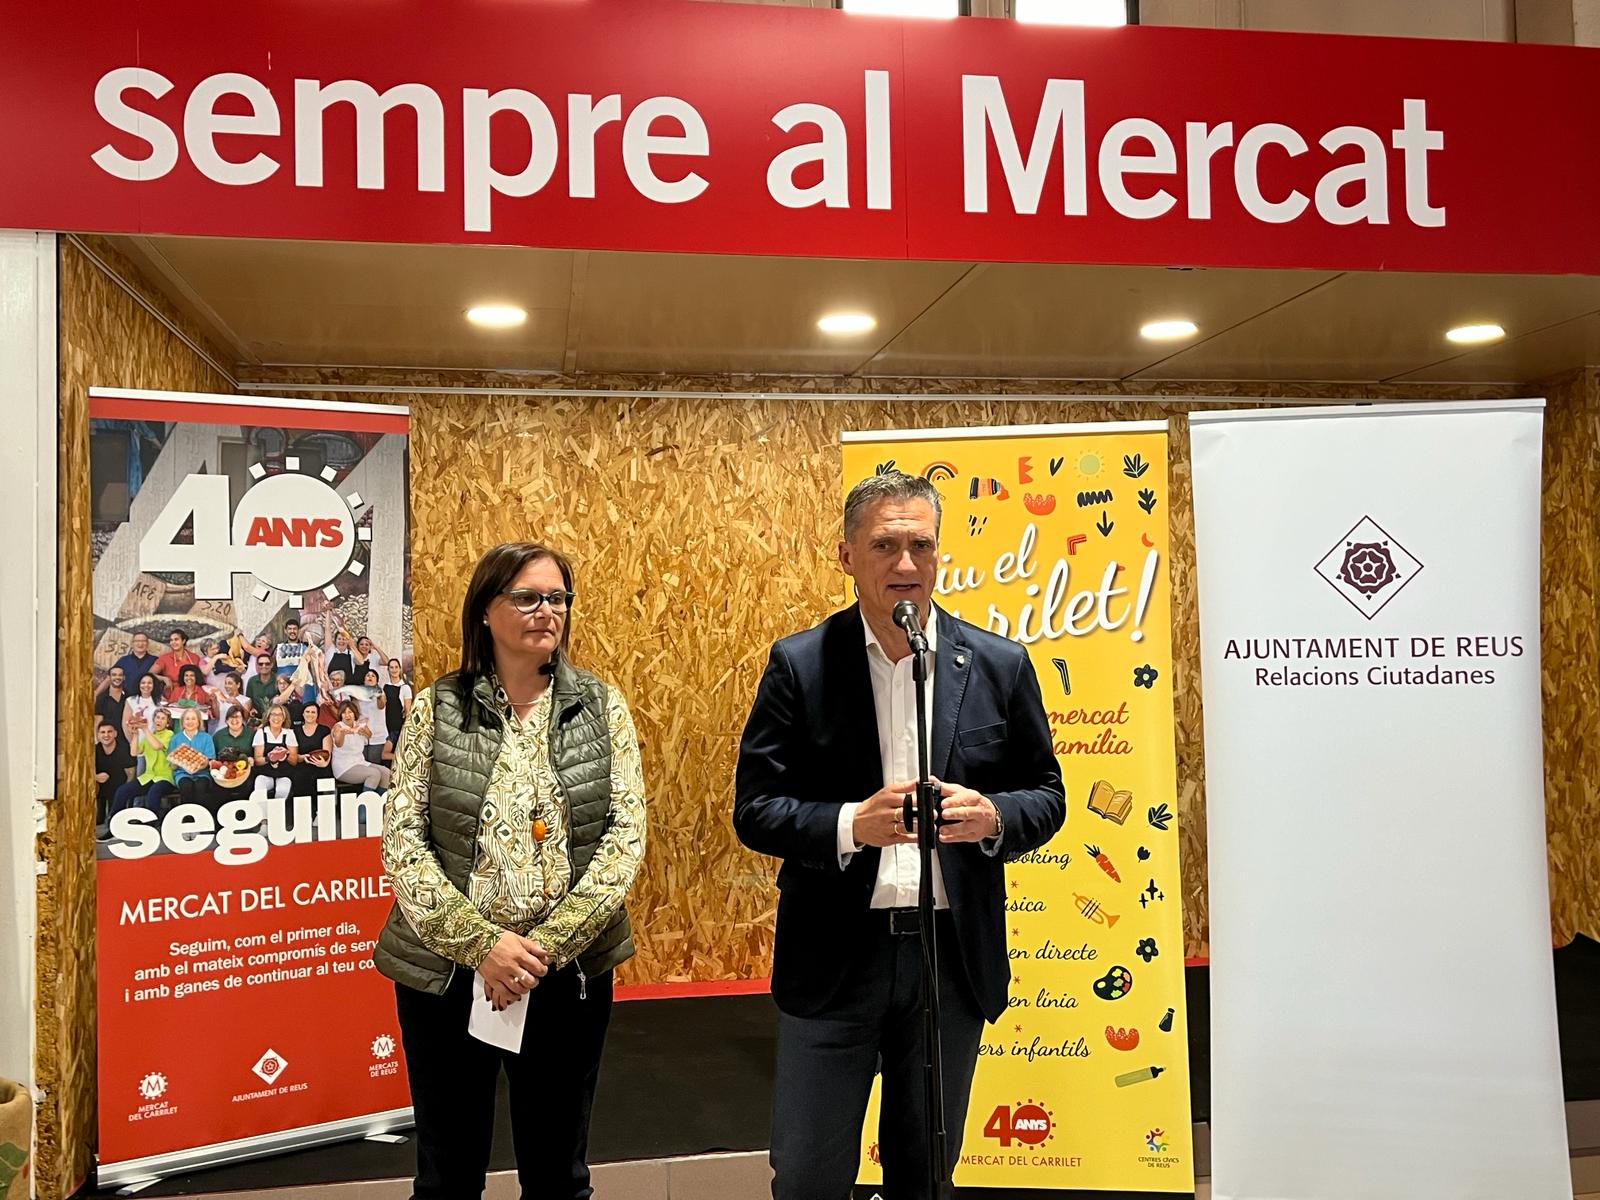 Dances, workshops and more activities at Mercat del Carrilet this spring